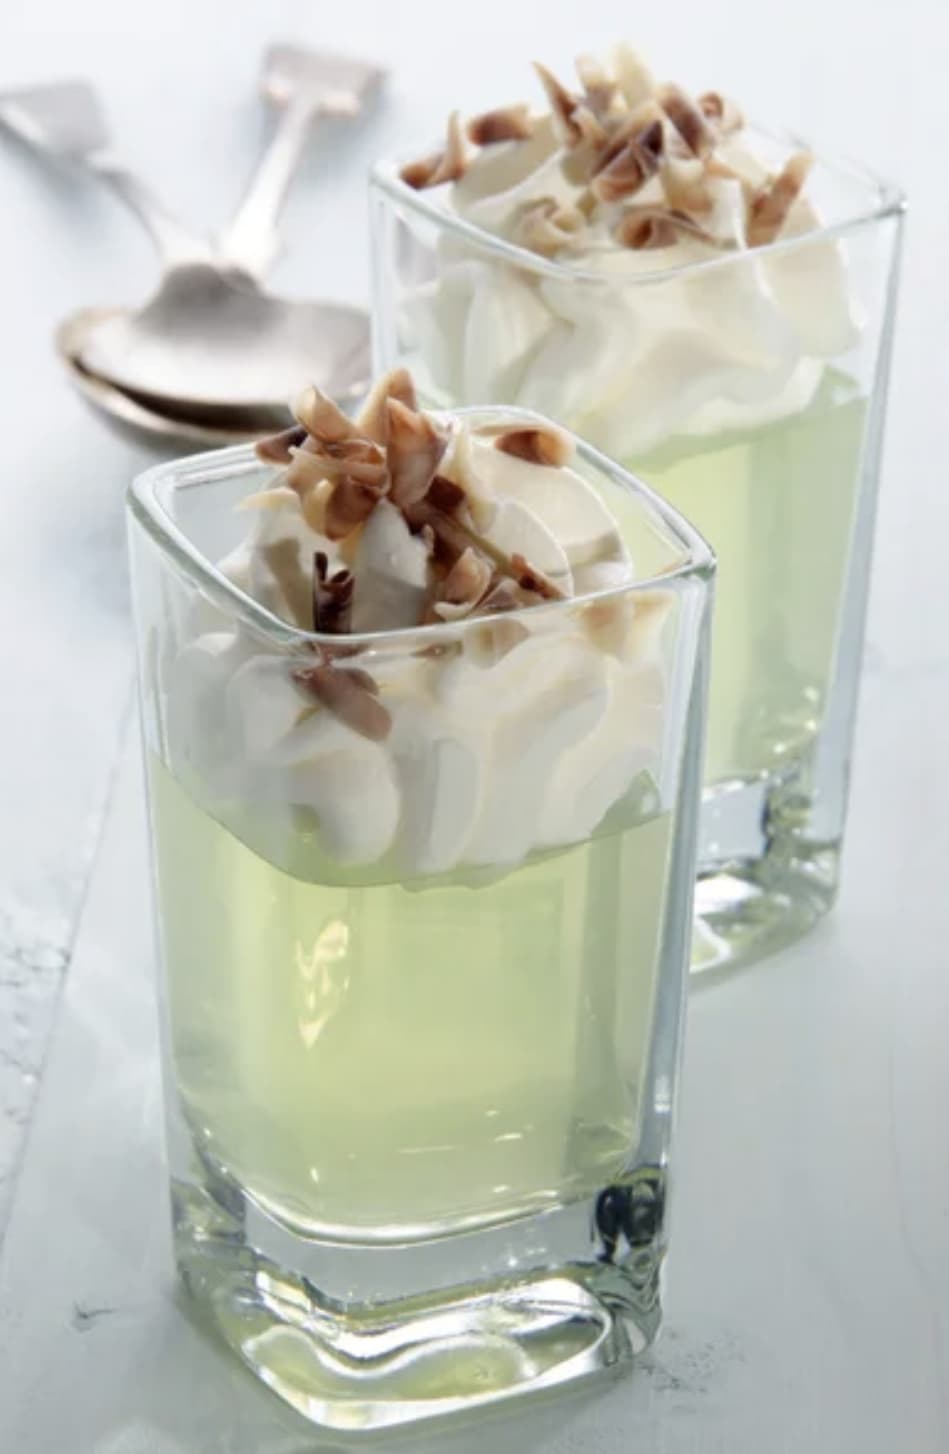 Two jello shots topped with whipped cream and chopped nuts